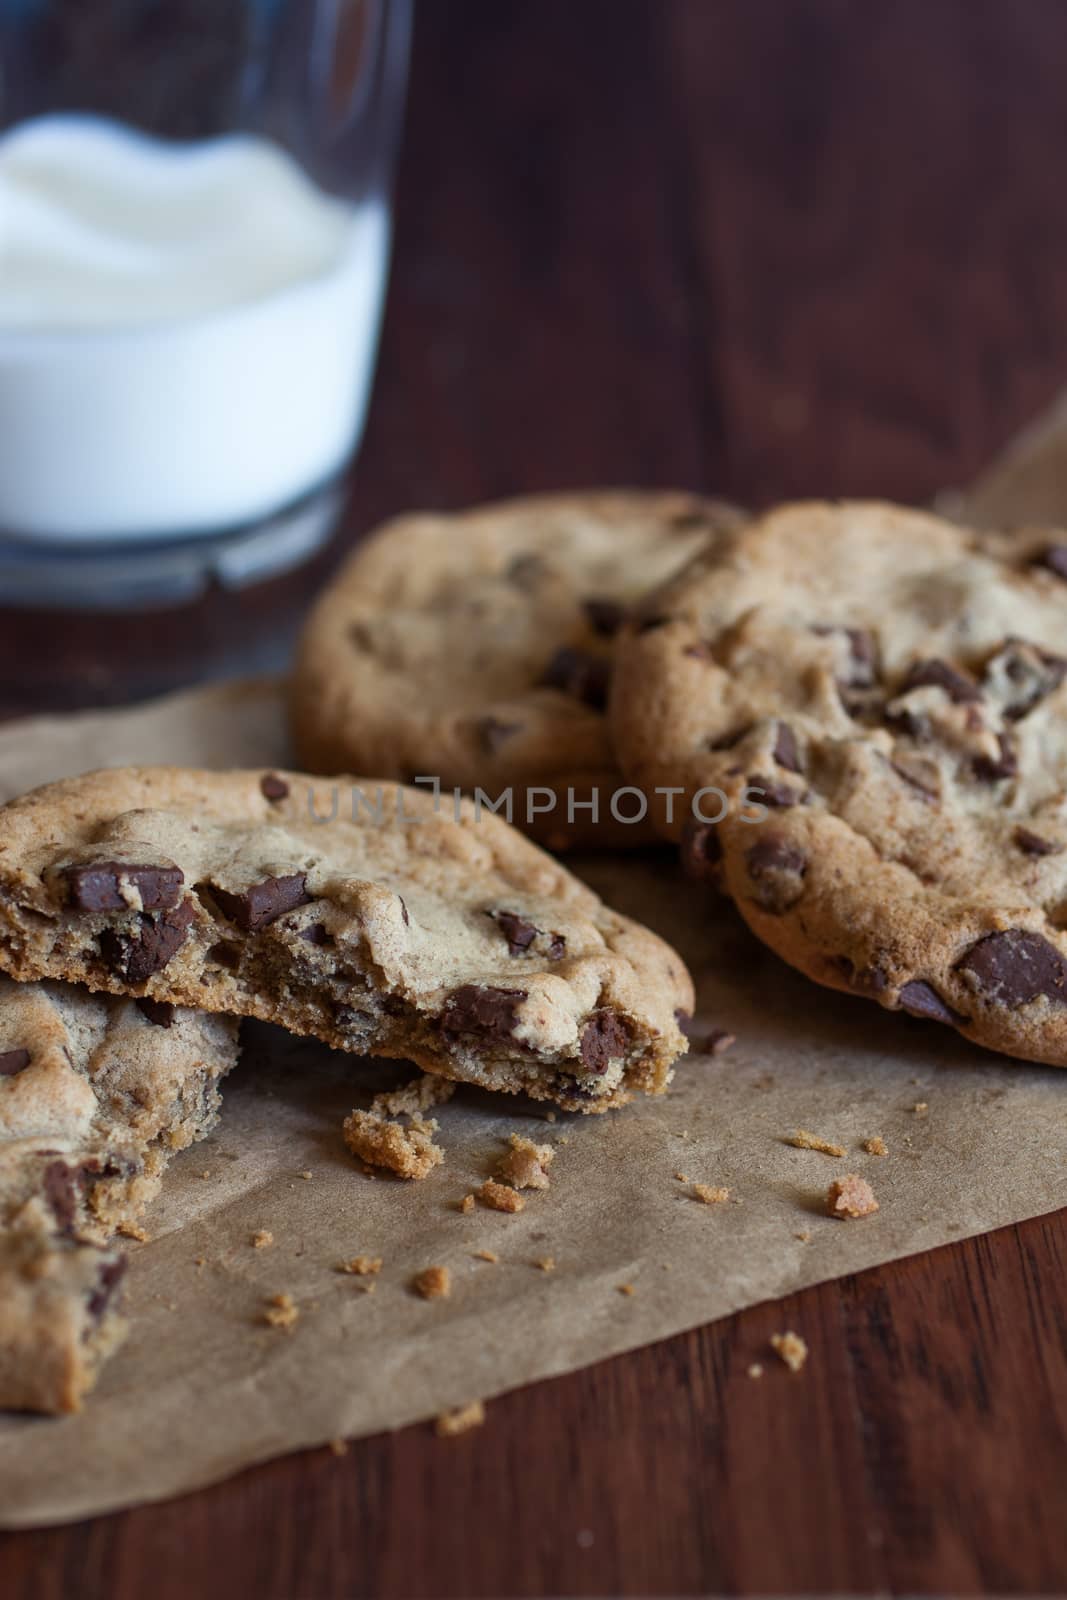 Fresh chocolate chunk cookies on a piece of brown paper  with a glass of miolk on a wooden table.